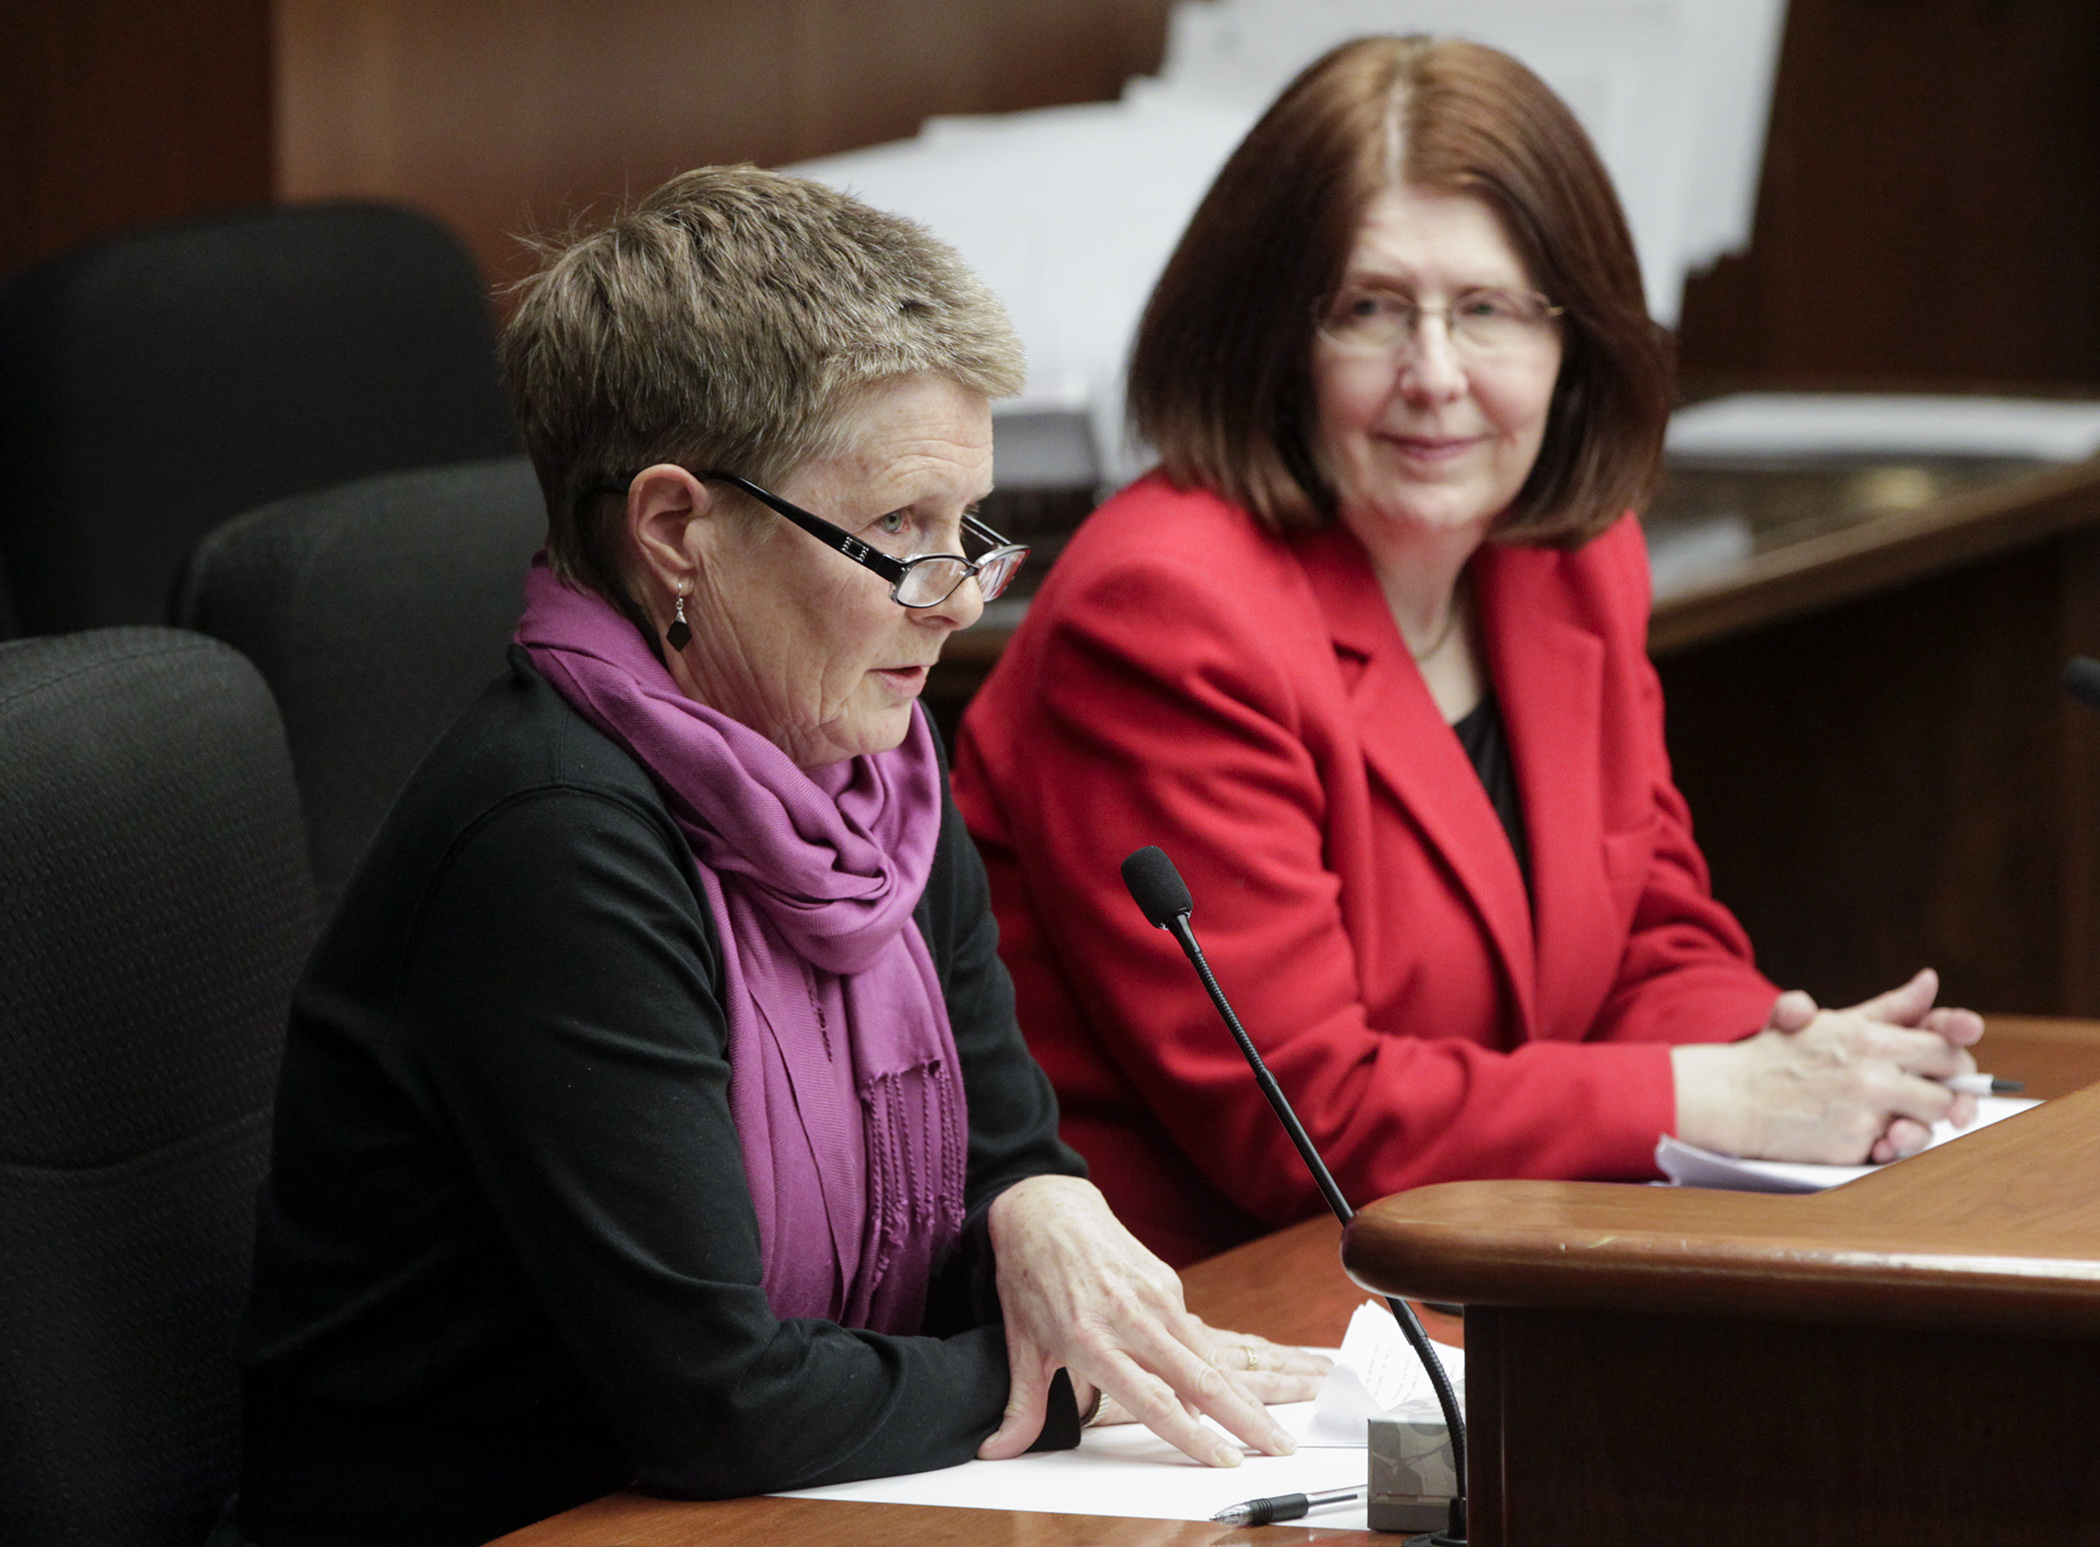 Mary Jo Majerus, owner of Healing Touch Spa, testifies March 7 before the House Taxes Committee on HF884, sponsored by Rep. Tina Liebling, right, which would, in part, exempt massage therapy from sales tax. Photo by Paul Battaglia